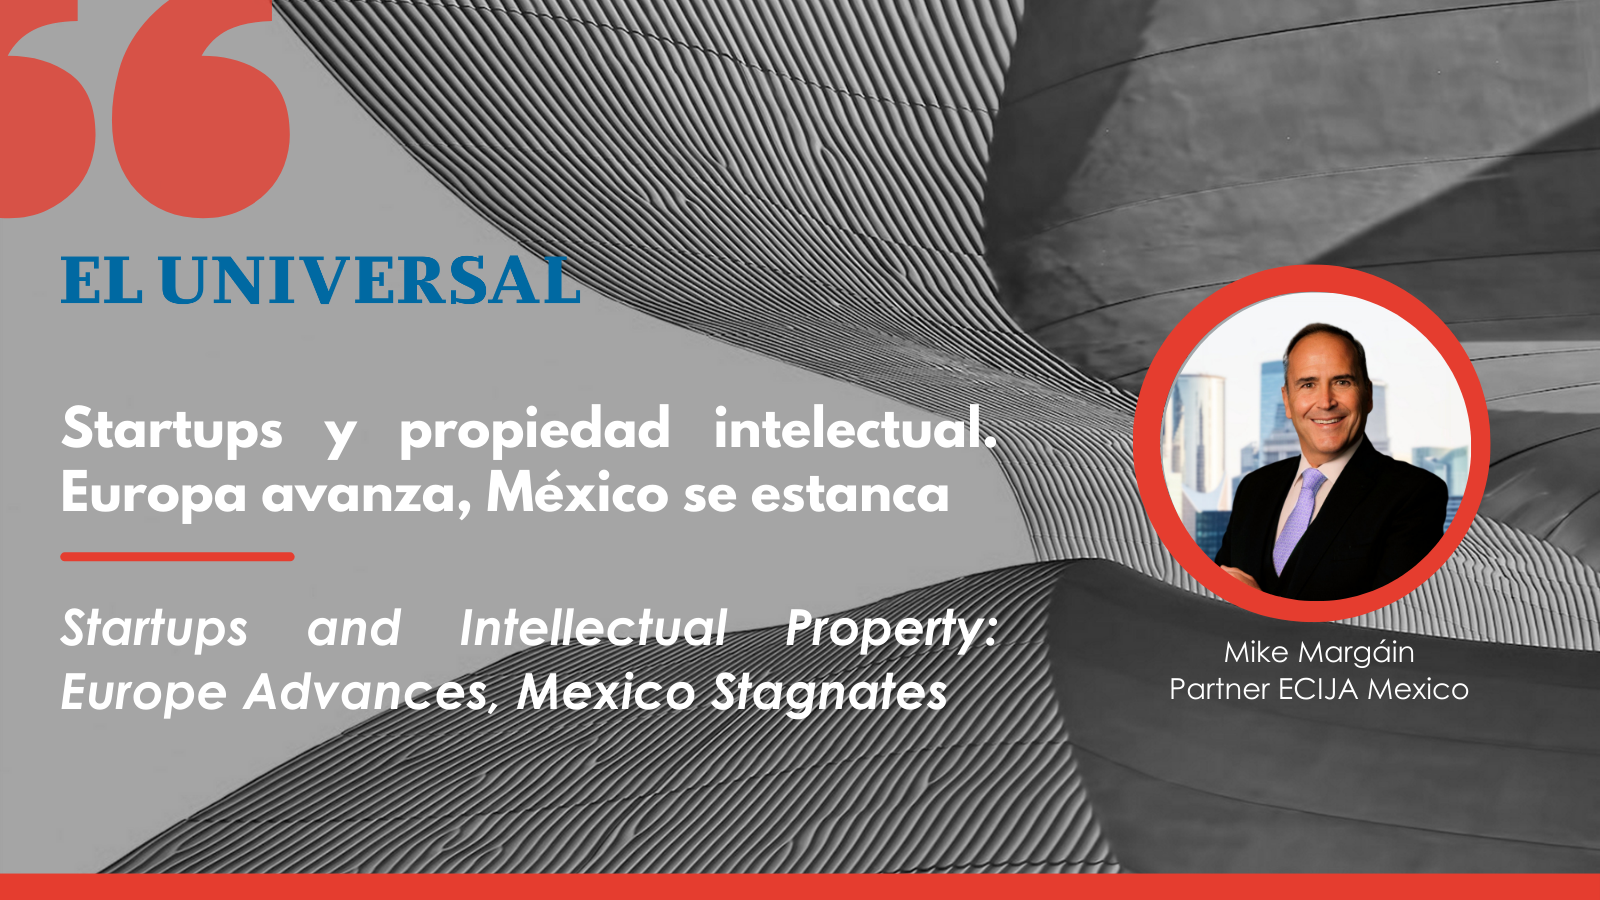 Startups and Intellectual Property: Europe Advances, Mexico Stagnates